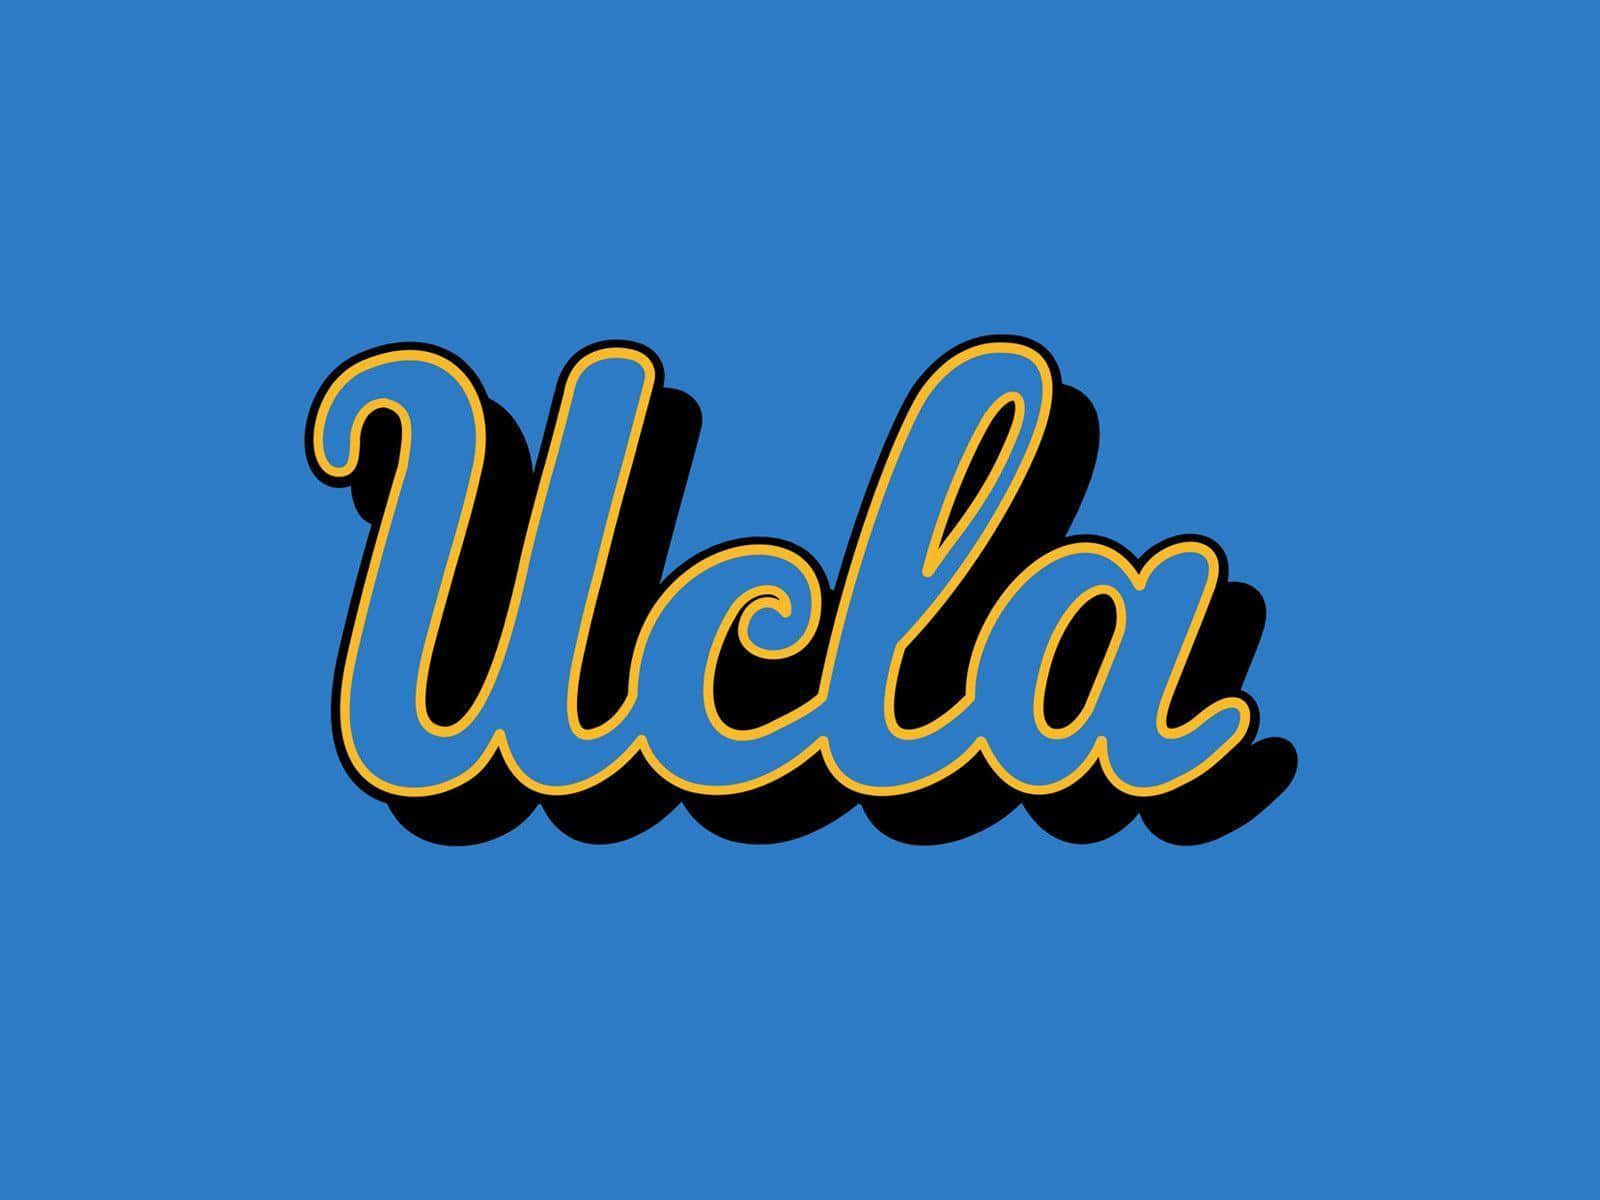 Enjoy a peaceful day exploring the stunning UCLA campus Wallpaper